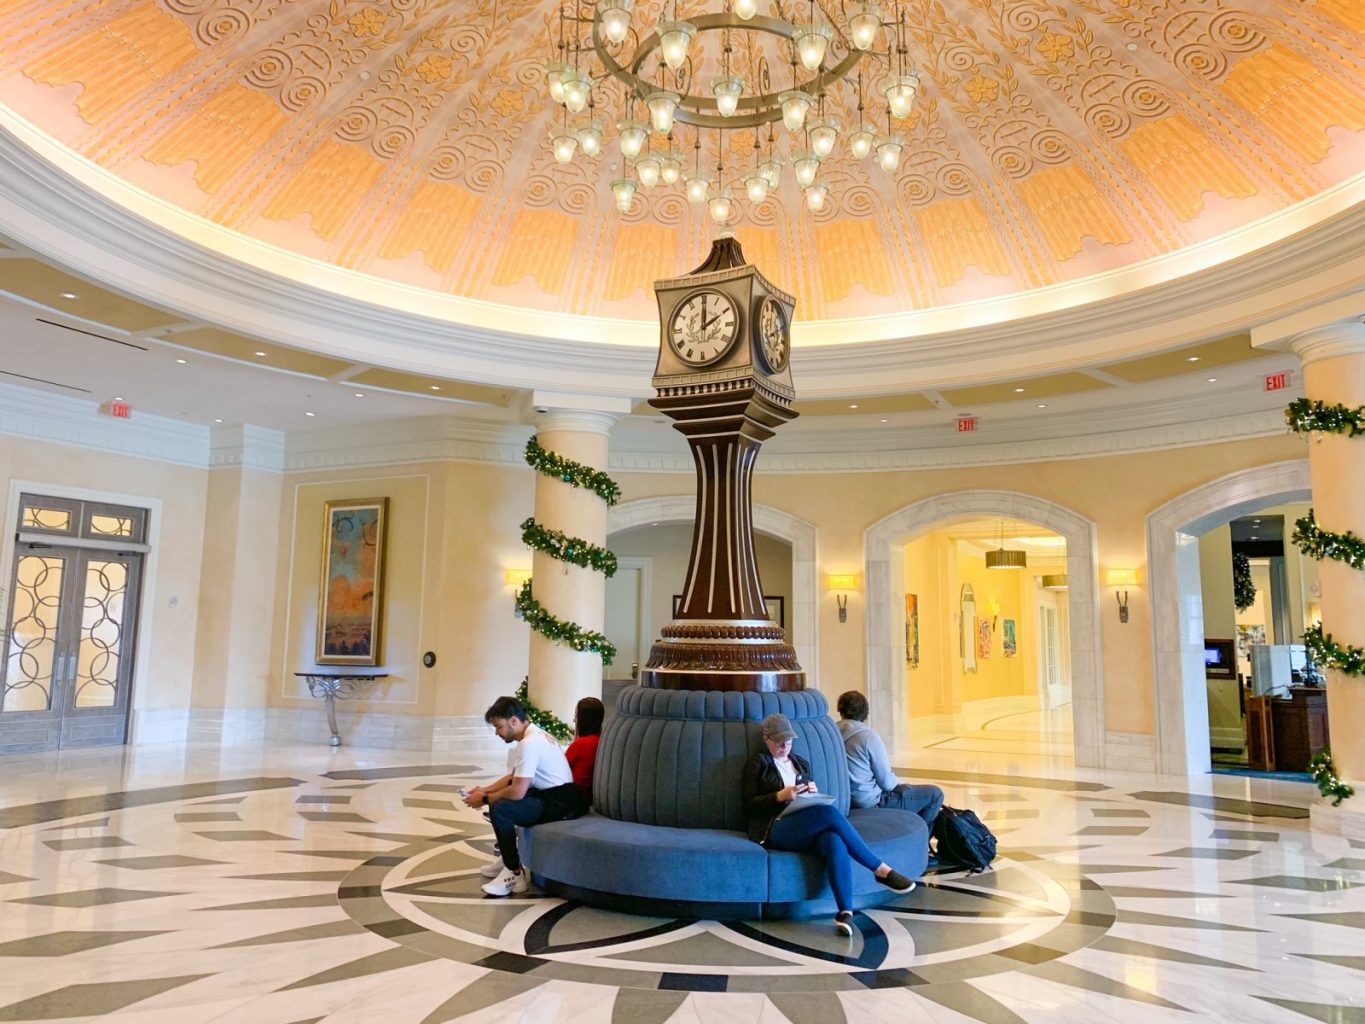 best hotels near Disney World lobby of Waldorf Astoria with chandelier and antique clock